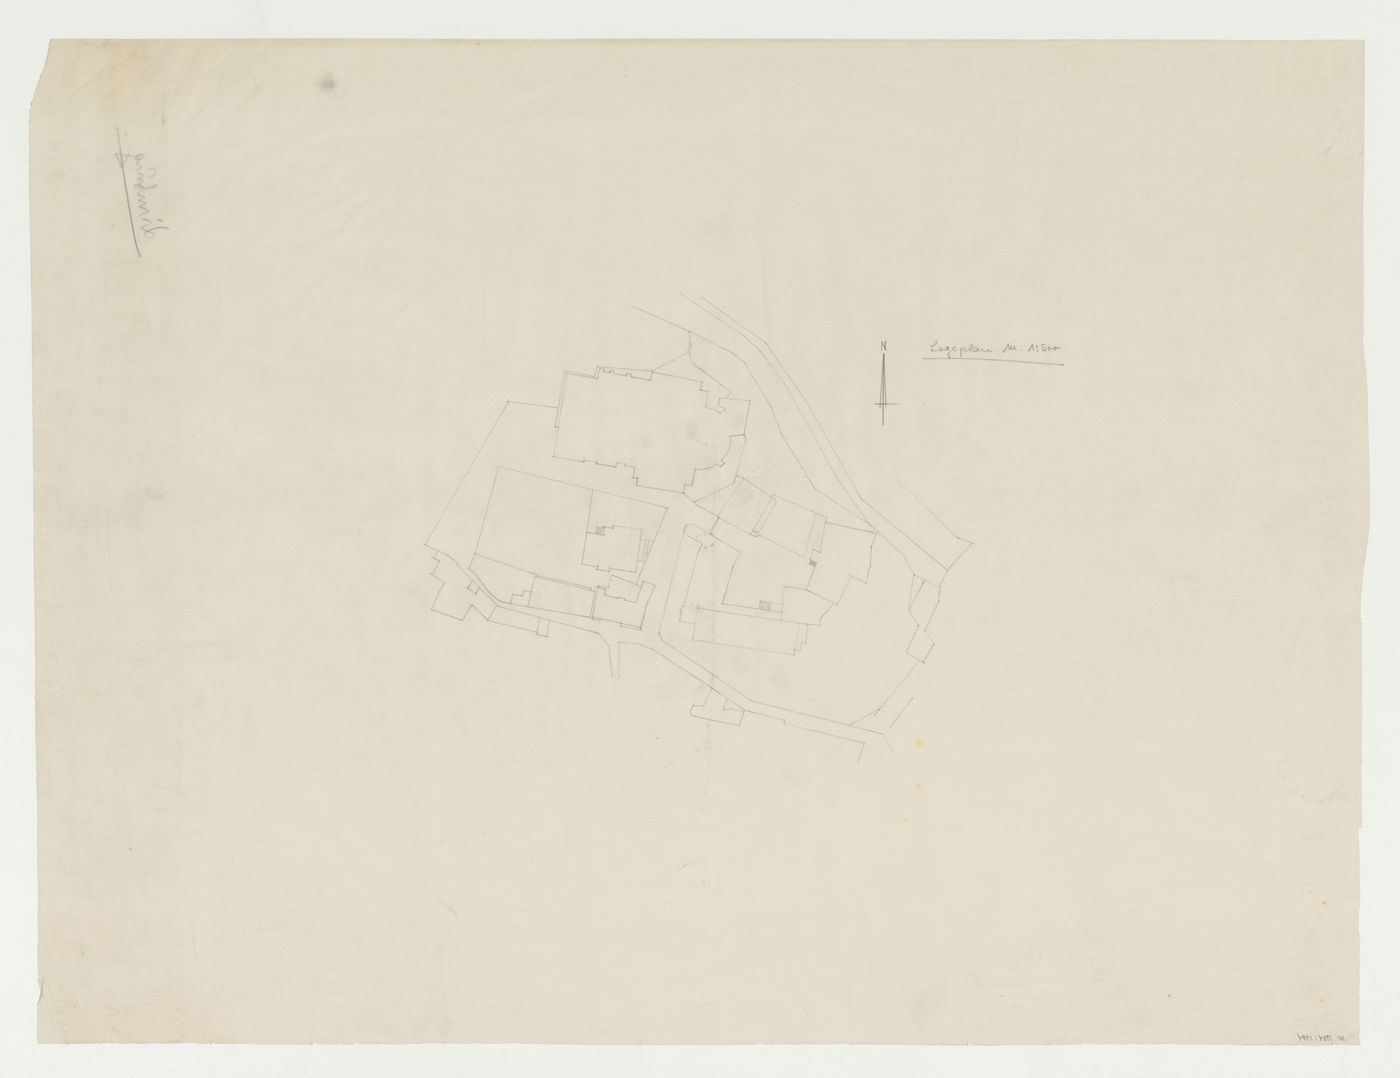 Site plan for an addition to an existing building, possibly a school, Limburg an der Lahn, Germany